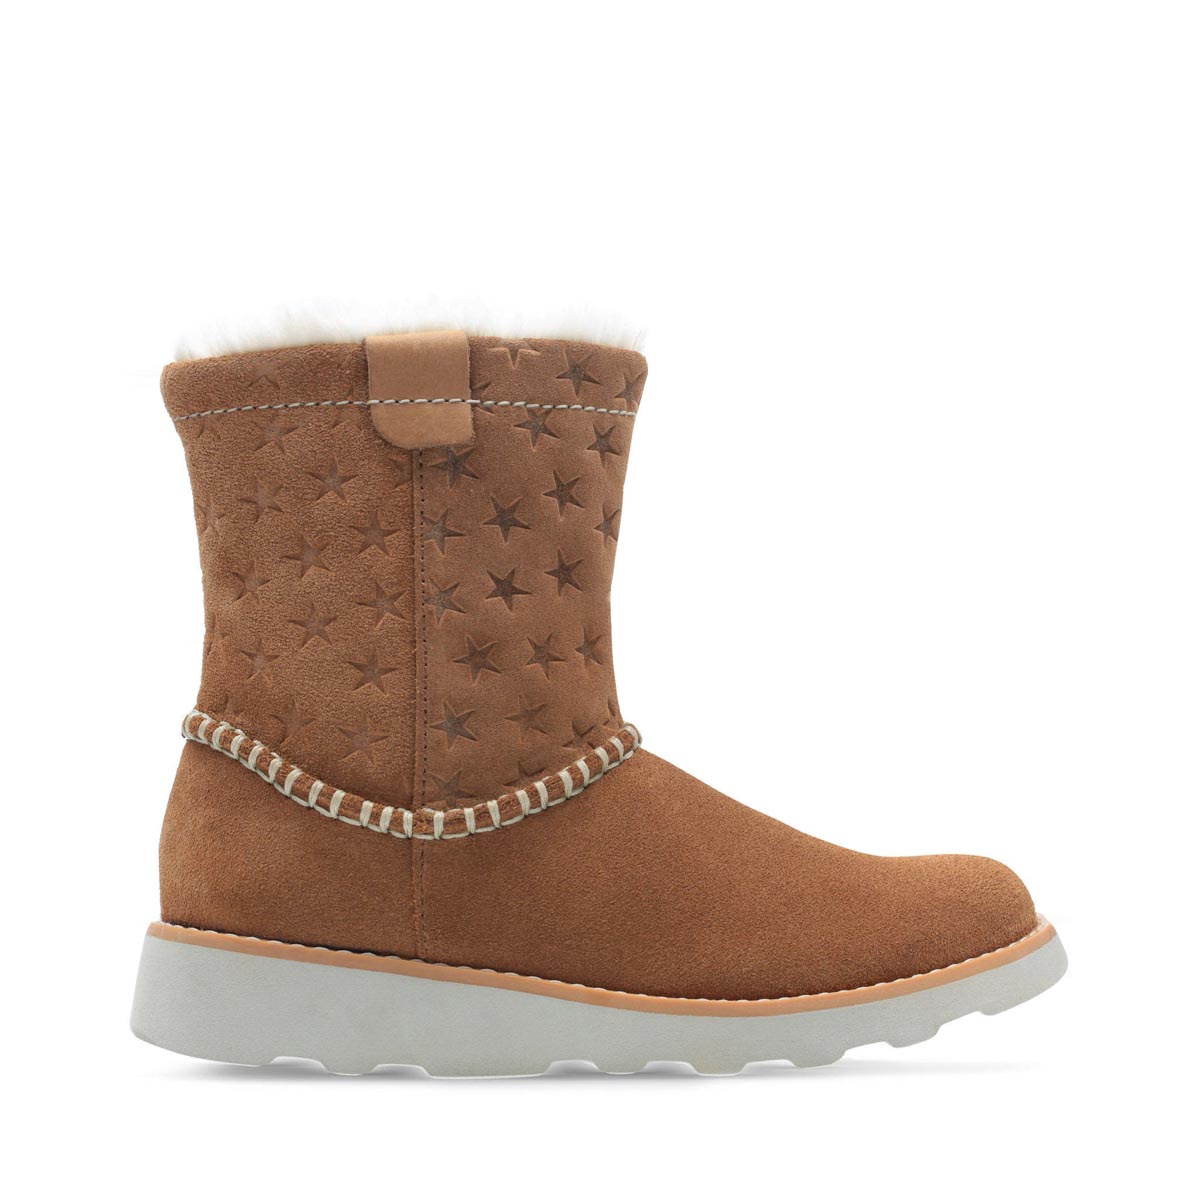 Girls Clarks Casual Fur Lined Boots Crown Piper 